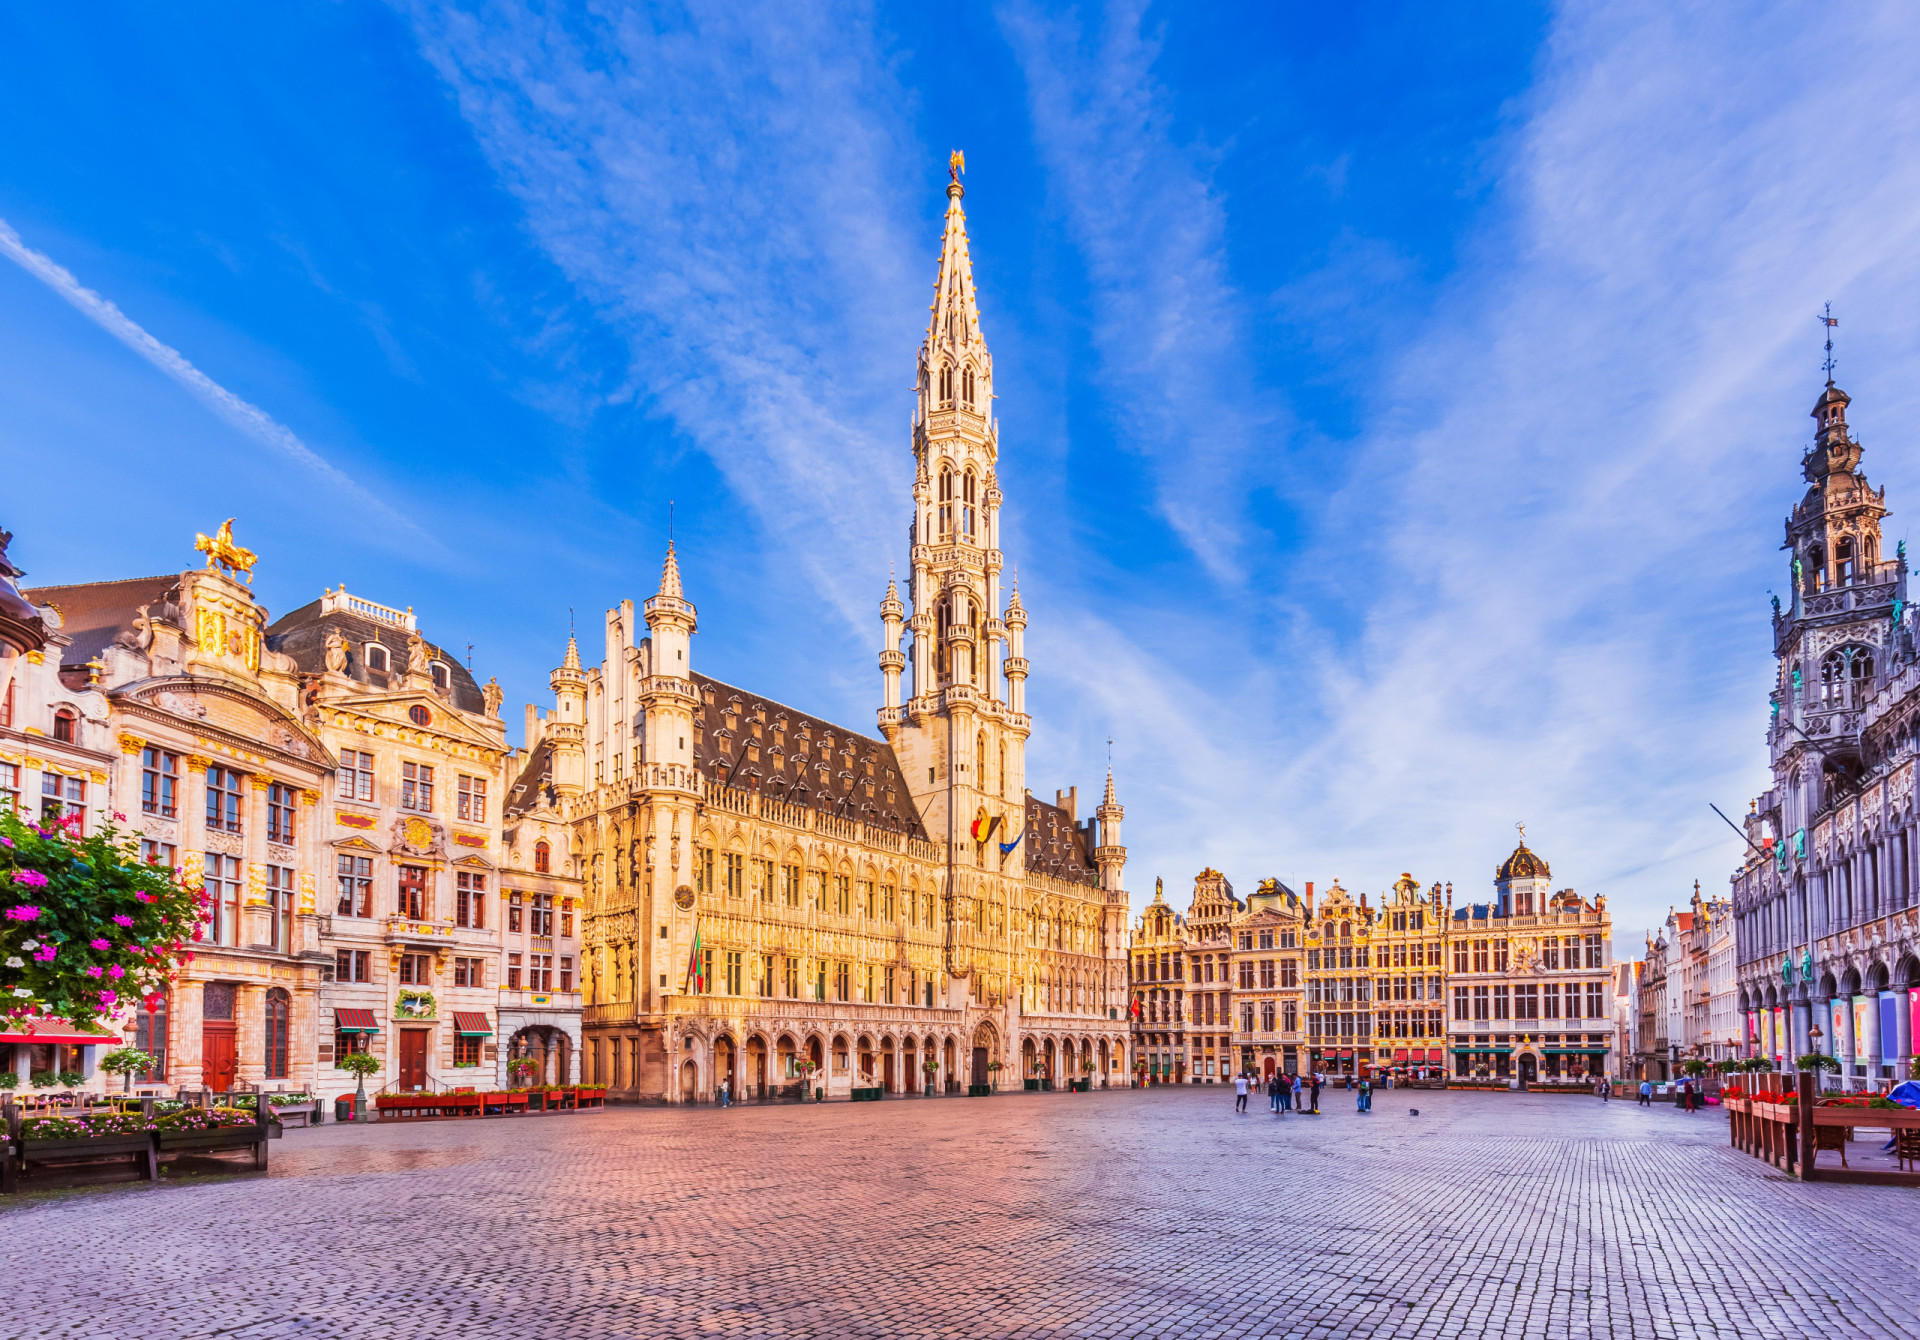 <p>In Brussels, tourist tax varies depending on a hotel's size and rating, and can reach €7.50 (US$8.17) per night. However, it varies from city to city.</p><p>You may also like:<a href="https://www.starsinsider.com/n/165050?utm_source=msn.com&utm_medium=display&utm_campaign=referral_description&utm_content=683460en-ph"> The most poisonous animals on the planet</a></p>